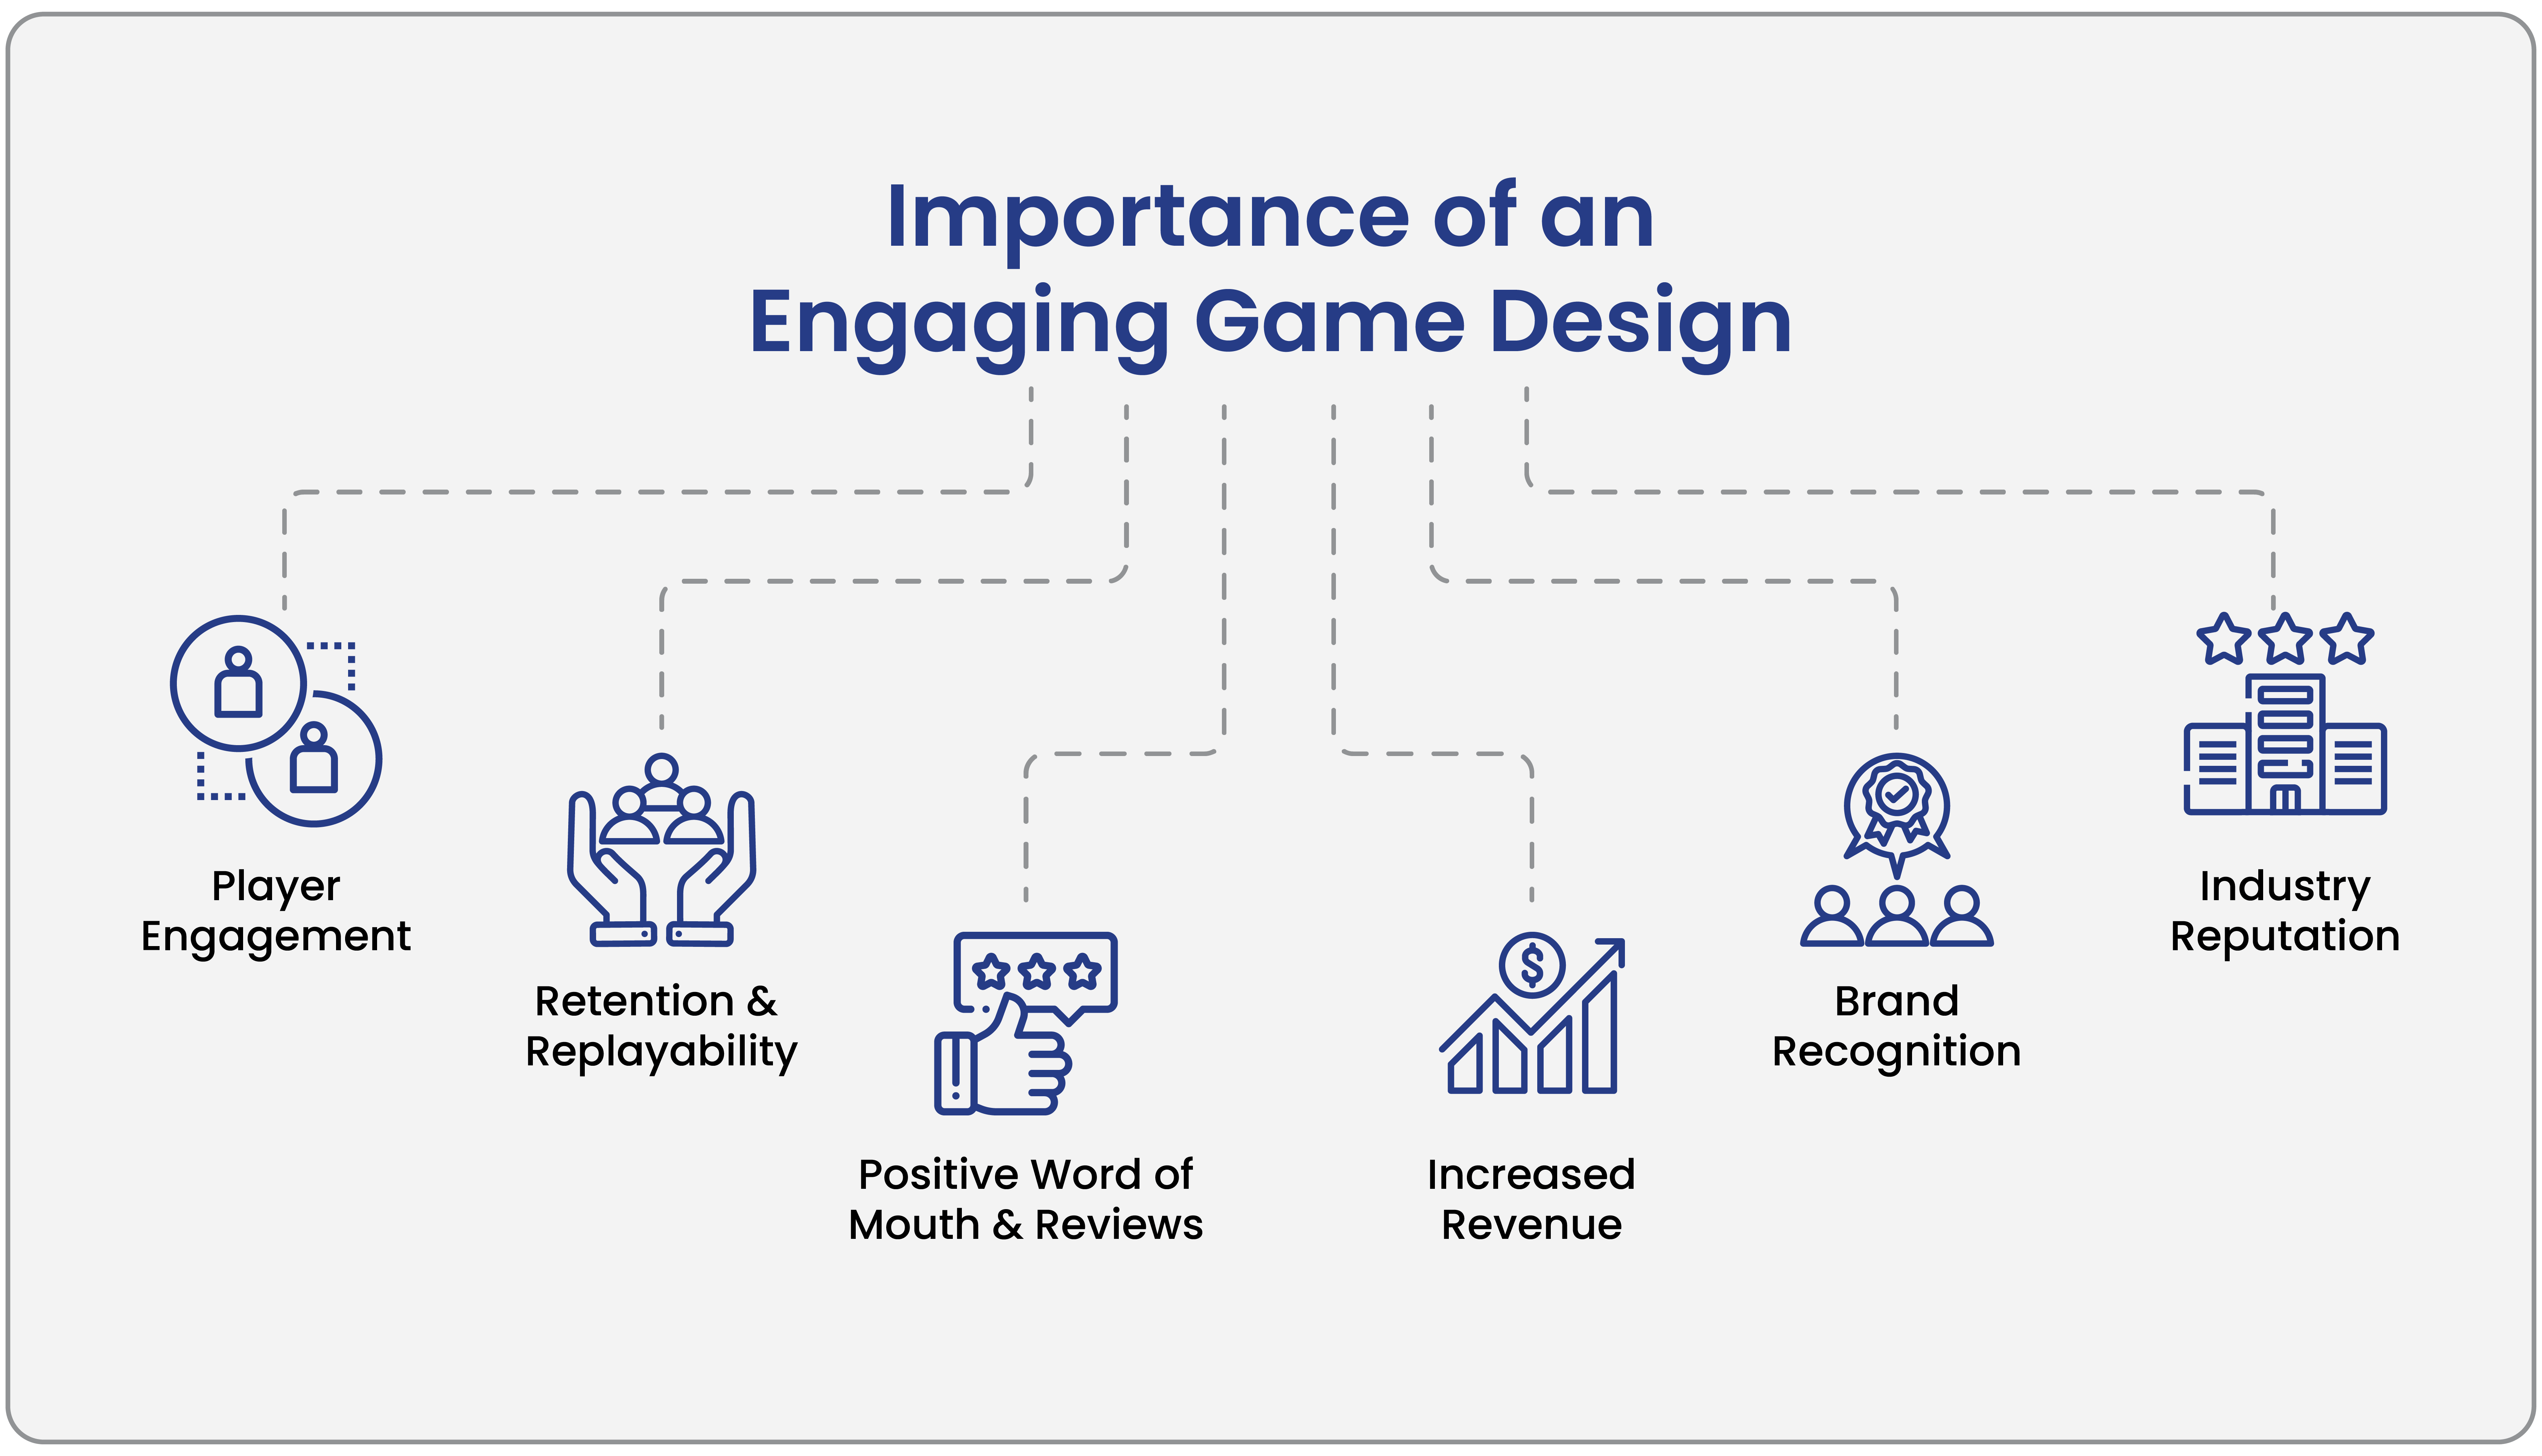 Importance of an Engaging Game Design